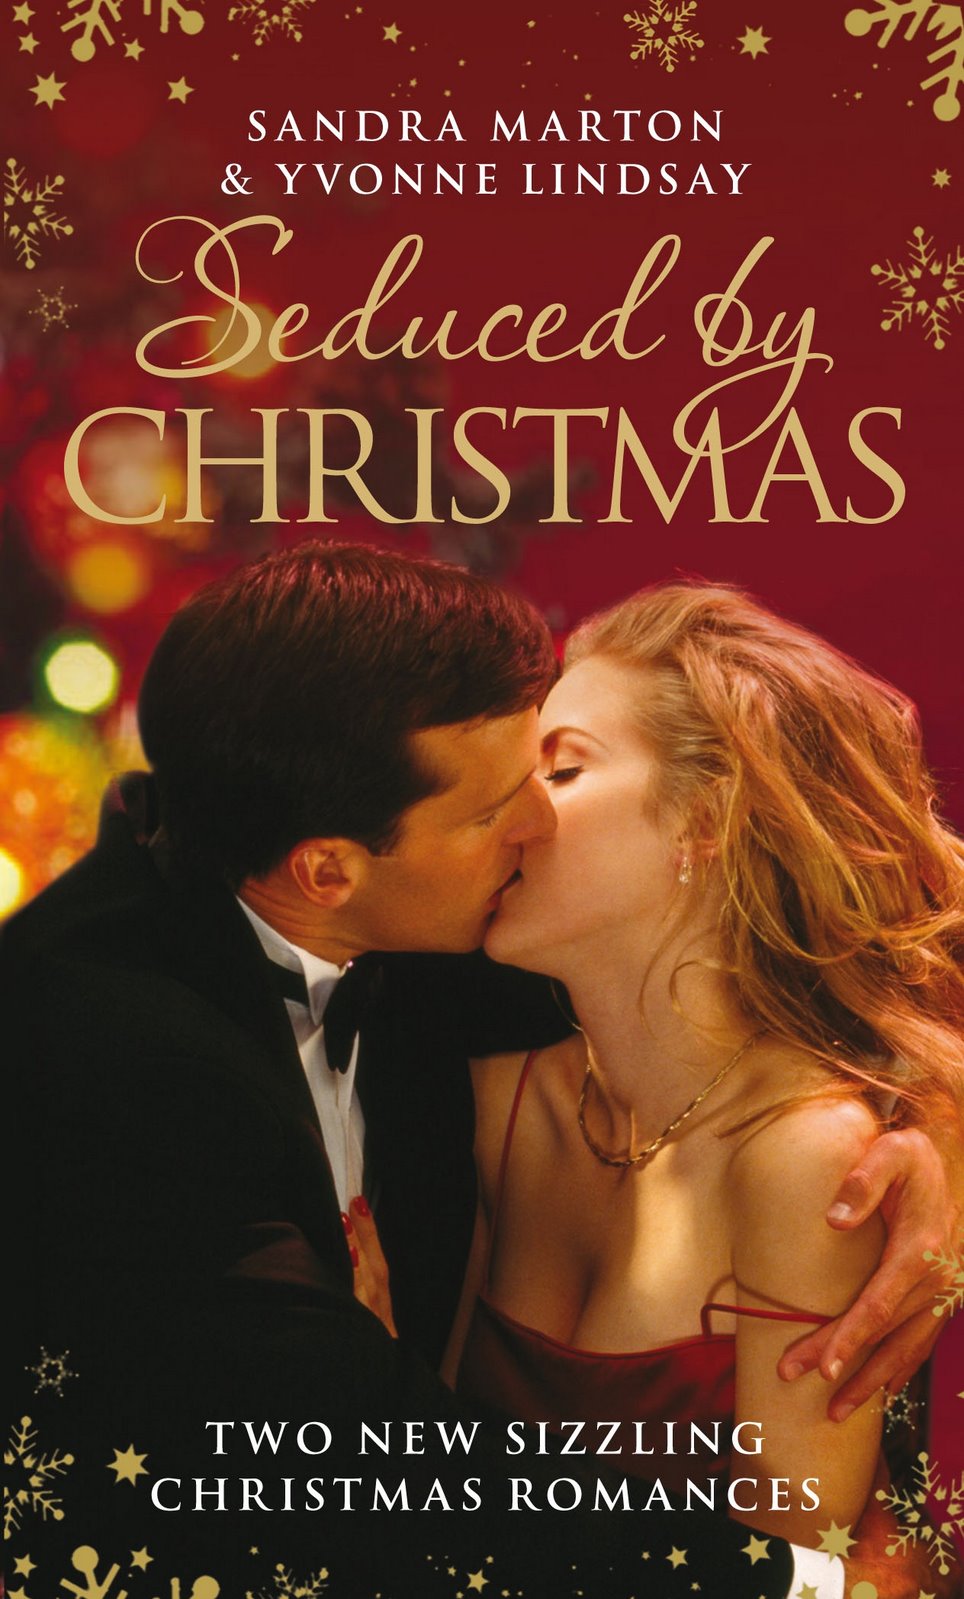 [seduced+by+christmas+(front+cover).JPG]